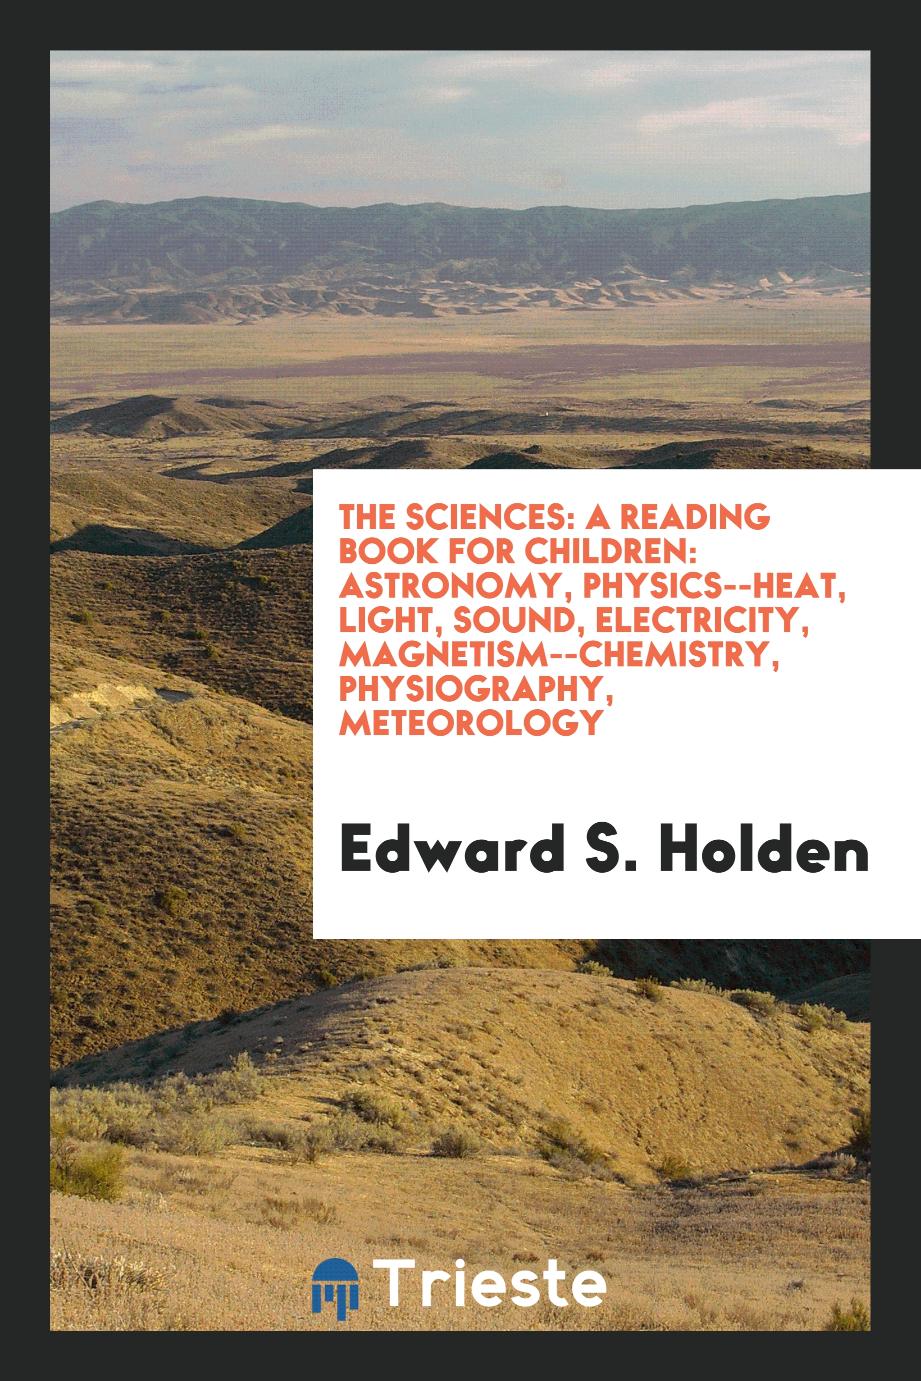 The sciences: a reading book for children: astronomy, physics--heat, light, sound, electricity, magnetism--chemistry, physiography, meteorology